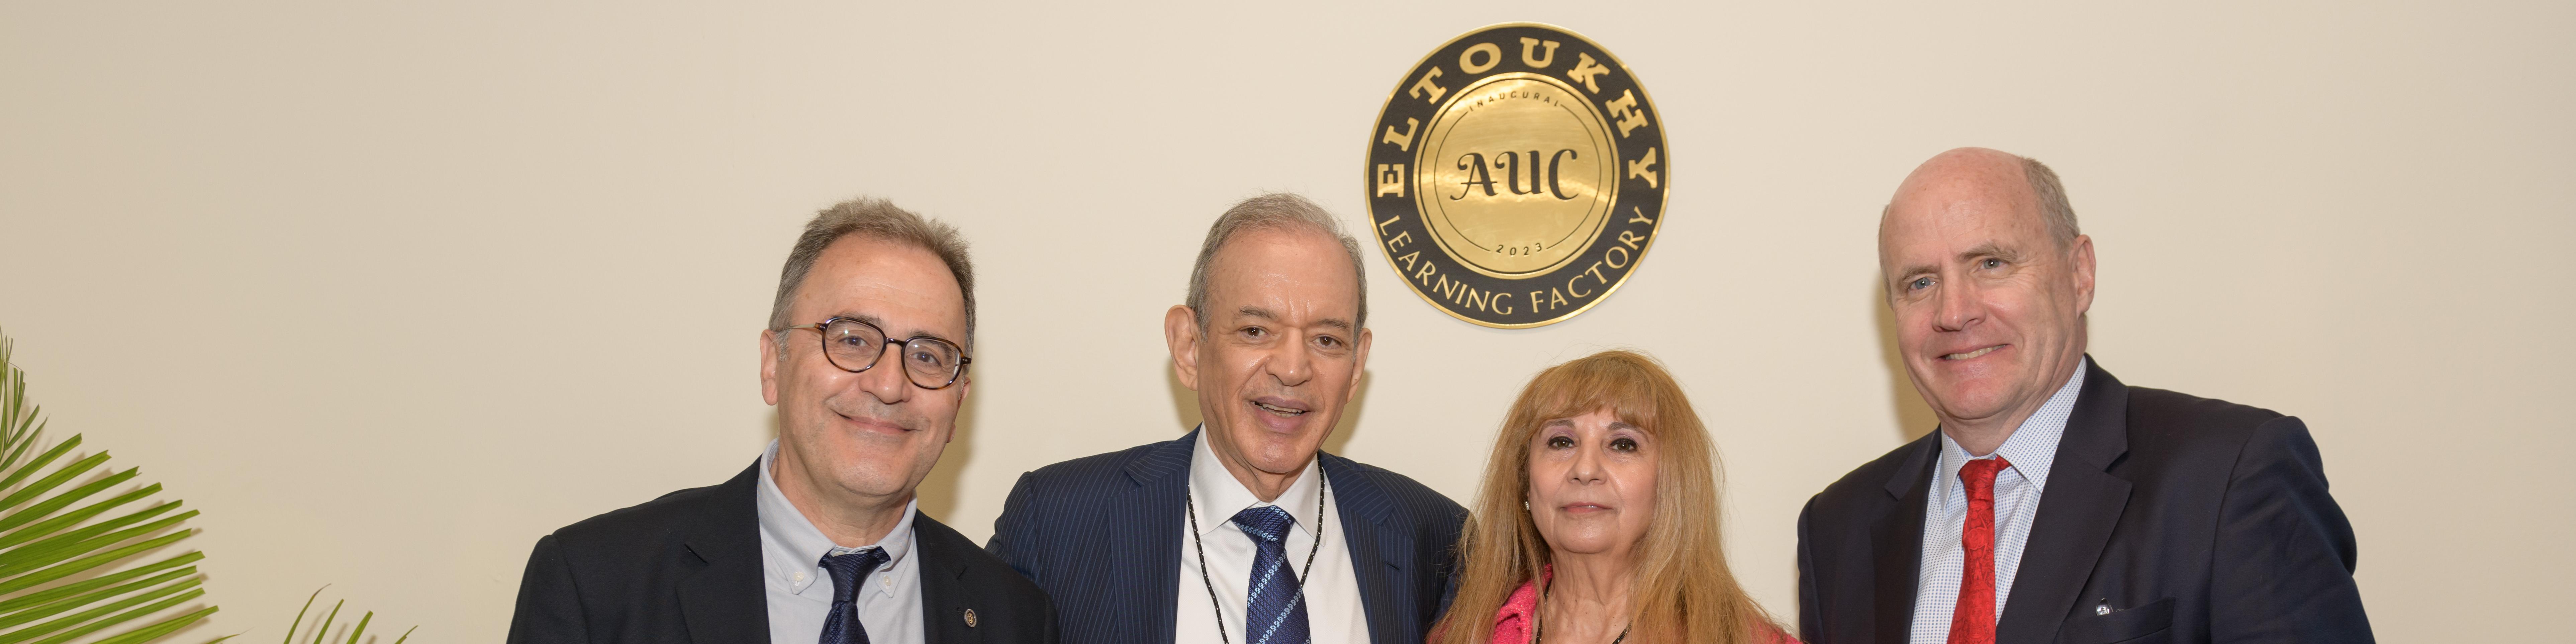 AUC Board Chair Mark Turnage, AUC President Ahmad Dallal and Dr. and Mrs. Eltoukhy